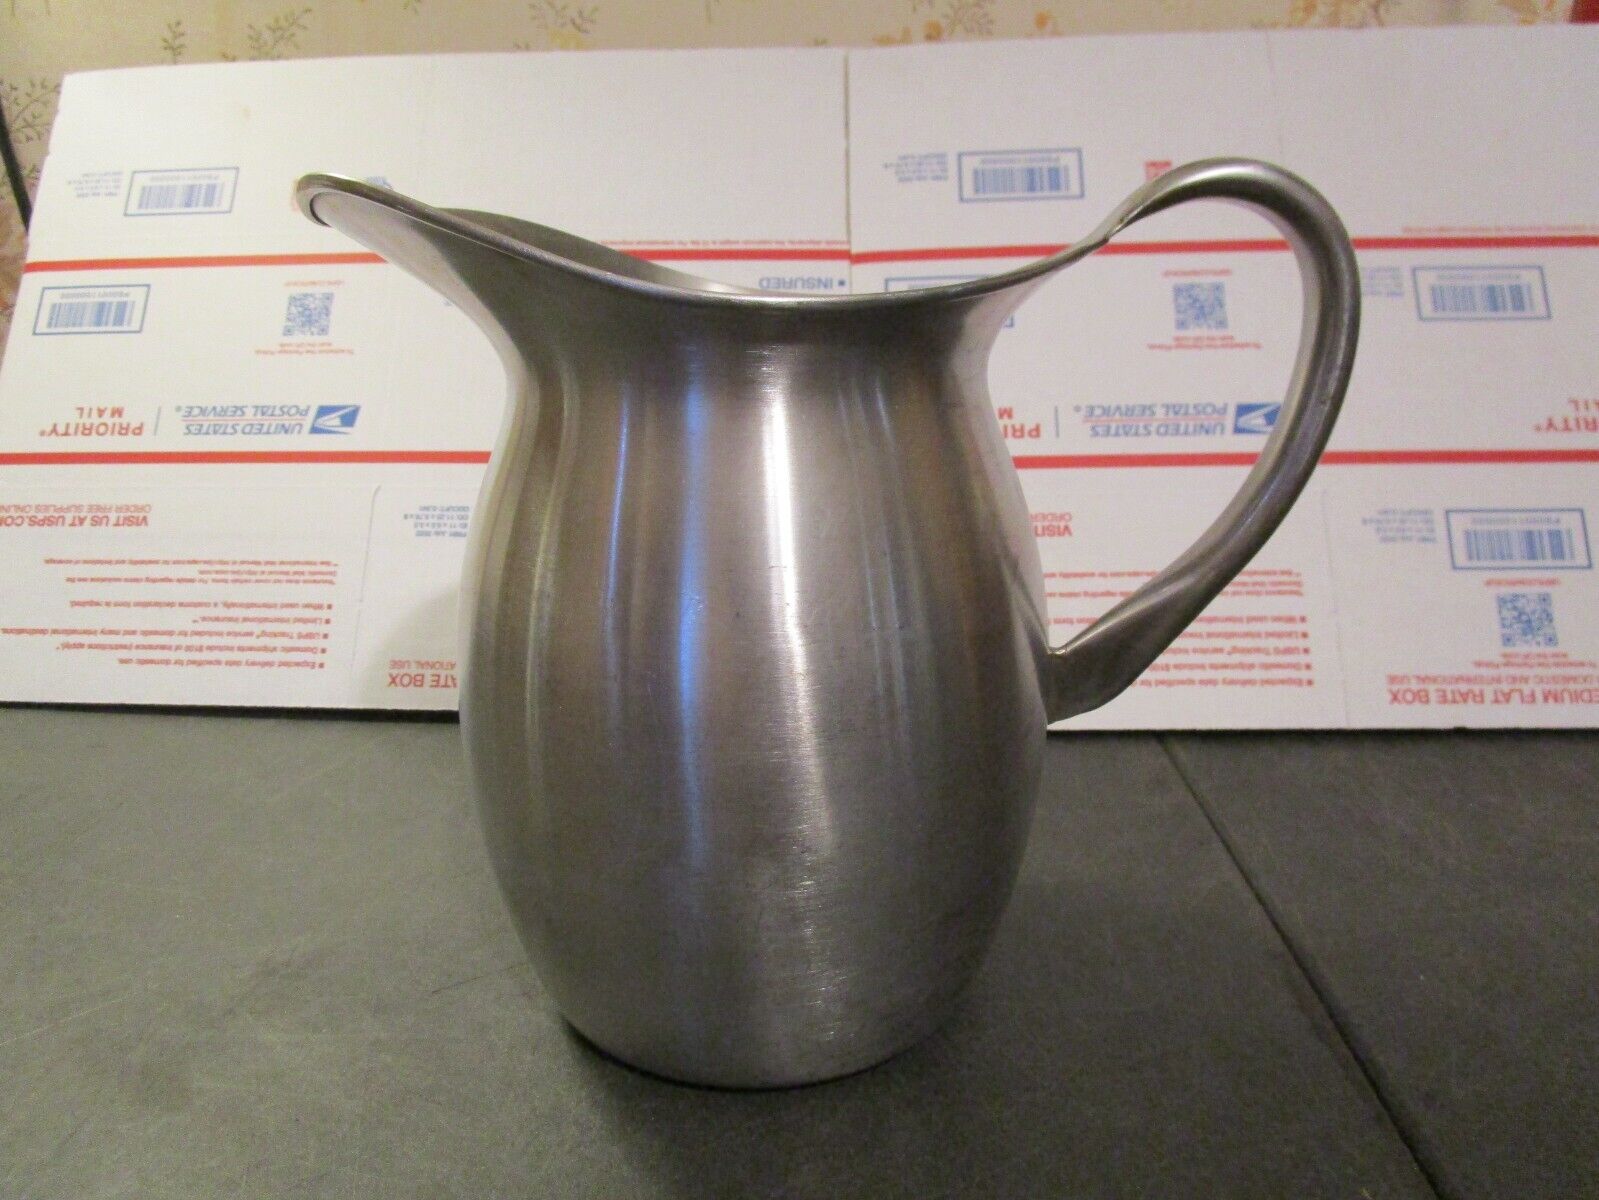 Vollrath 9” Stainless Steel Pitcher US Navy M.D. U.S.N. Ship’s Galley